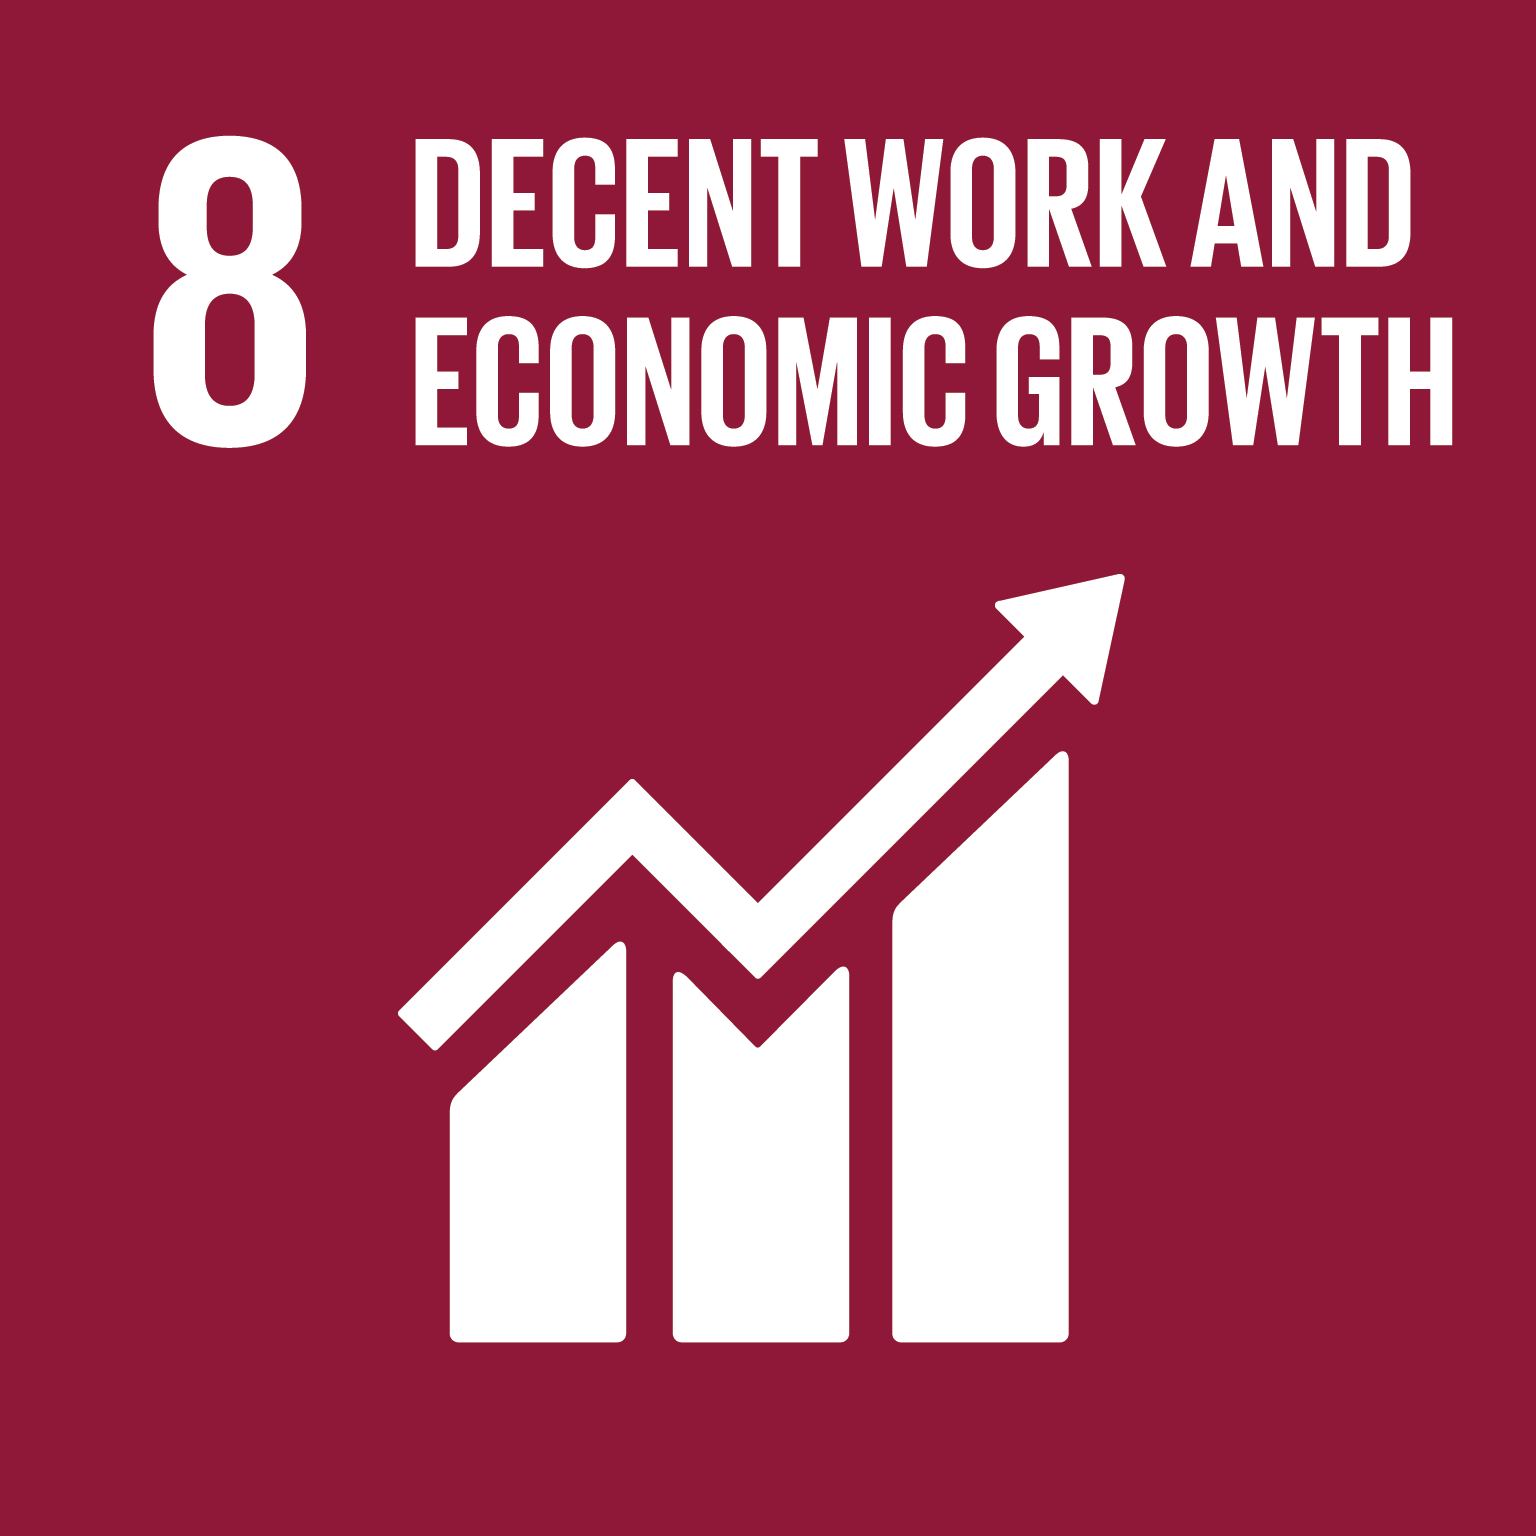 Sustainable Development Goal #8: Promote sustained, inclusive and sustainable economic growth, full and productive employment and decent work for all cover